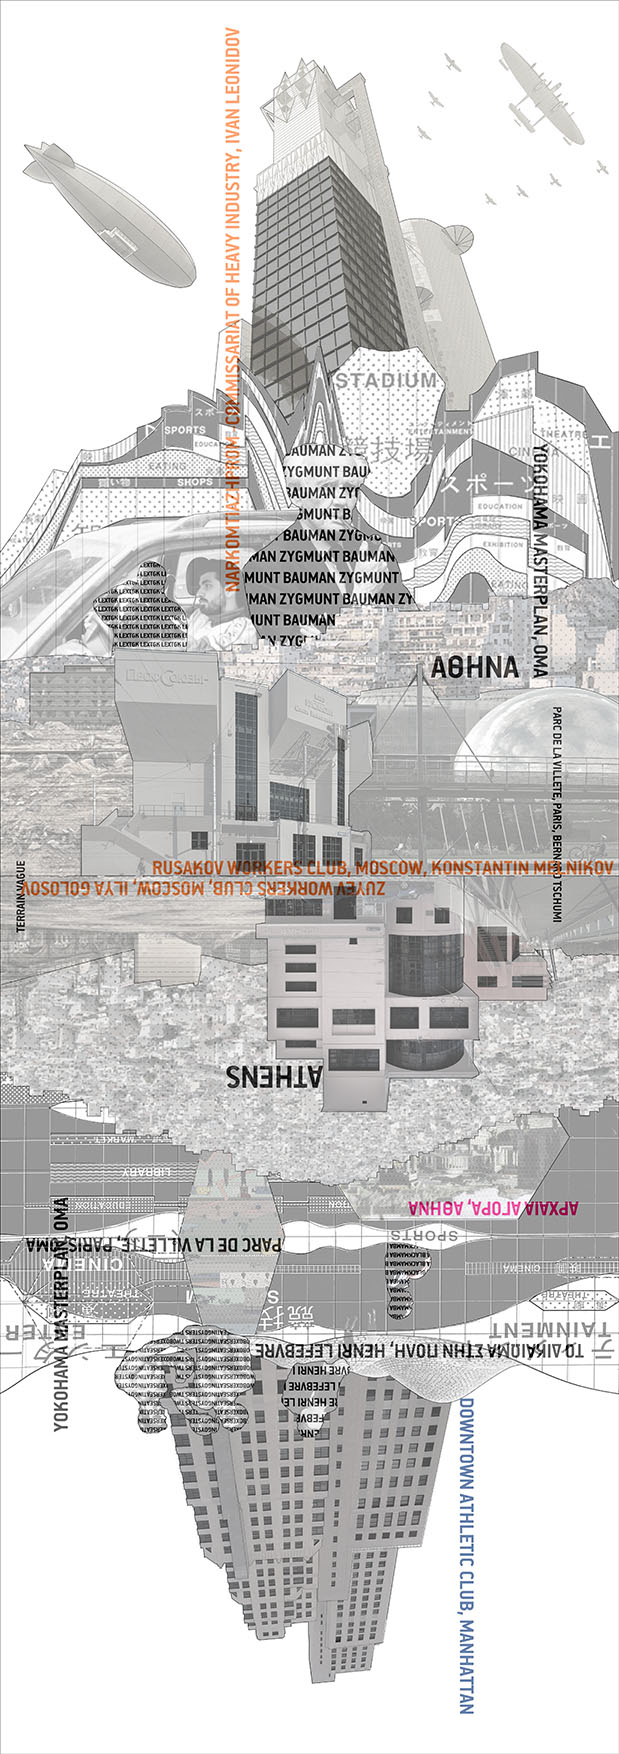 Archisearch A Story of Congestion | Diploma thesis by I. Georgaklis, E. Stampelos & A. Chouliaras